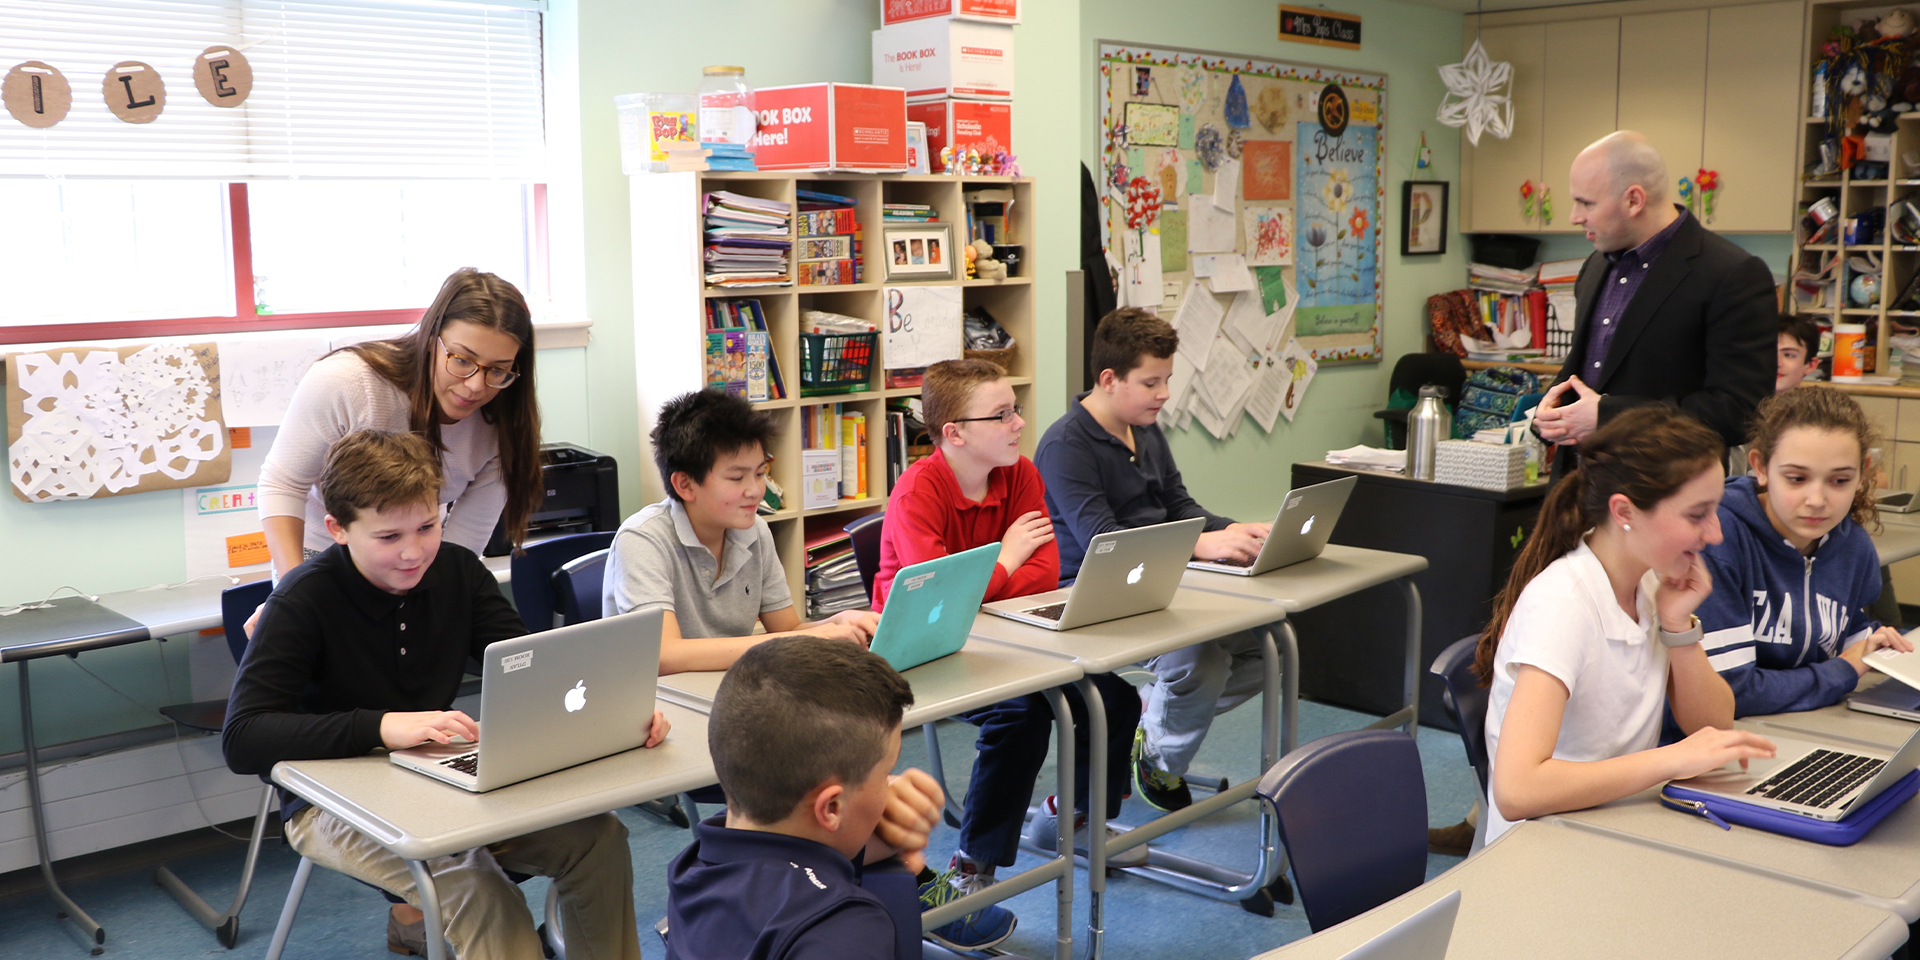 Two teachers help students with laptops in classroom